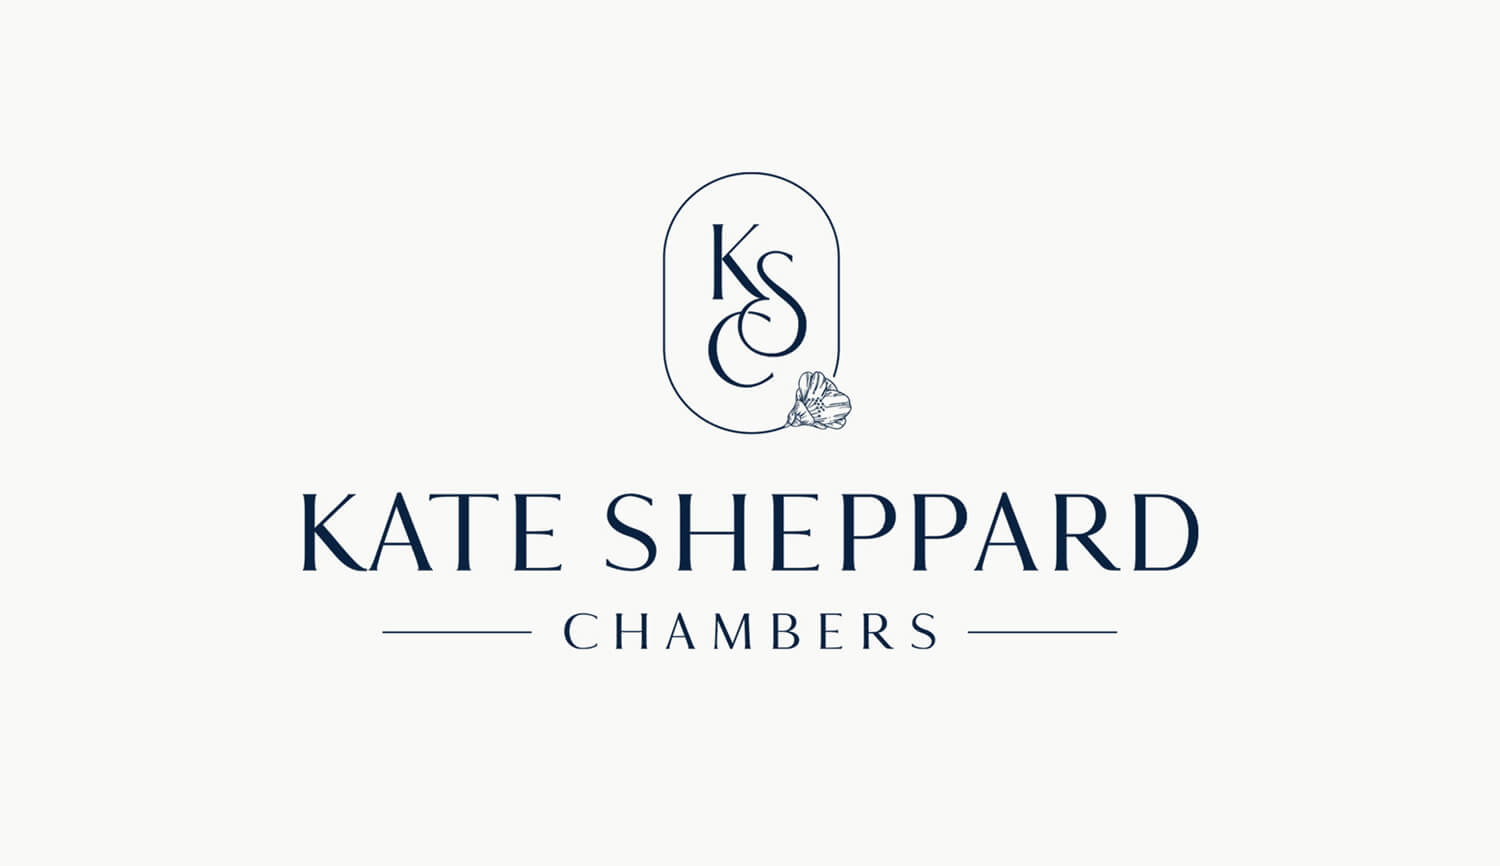 Kate Sheppard Chambers primary logo